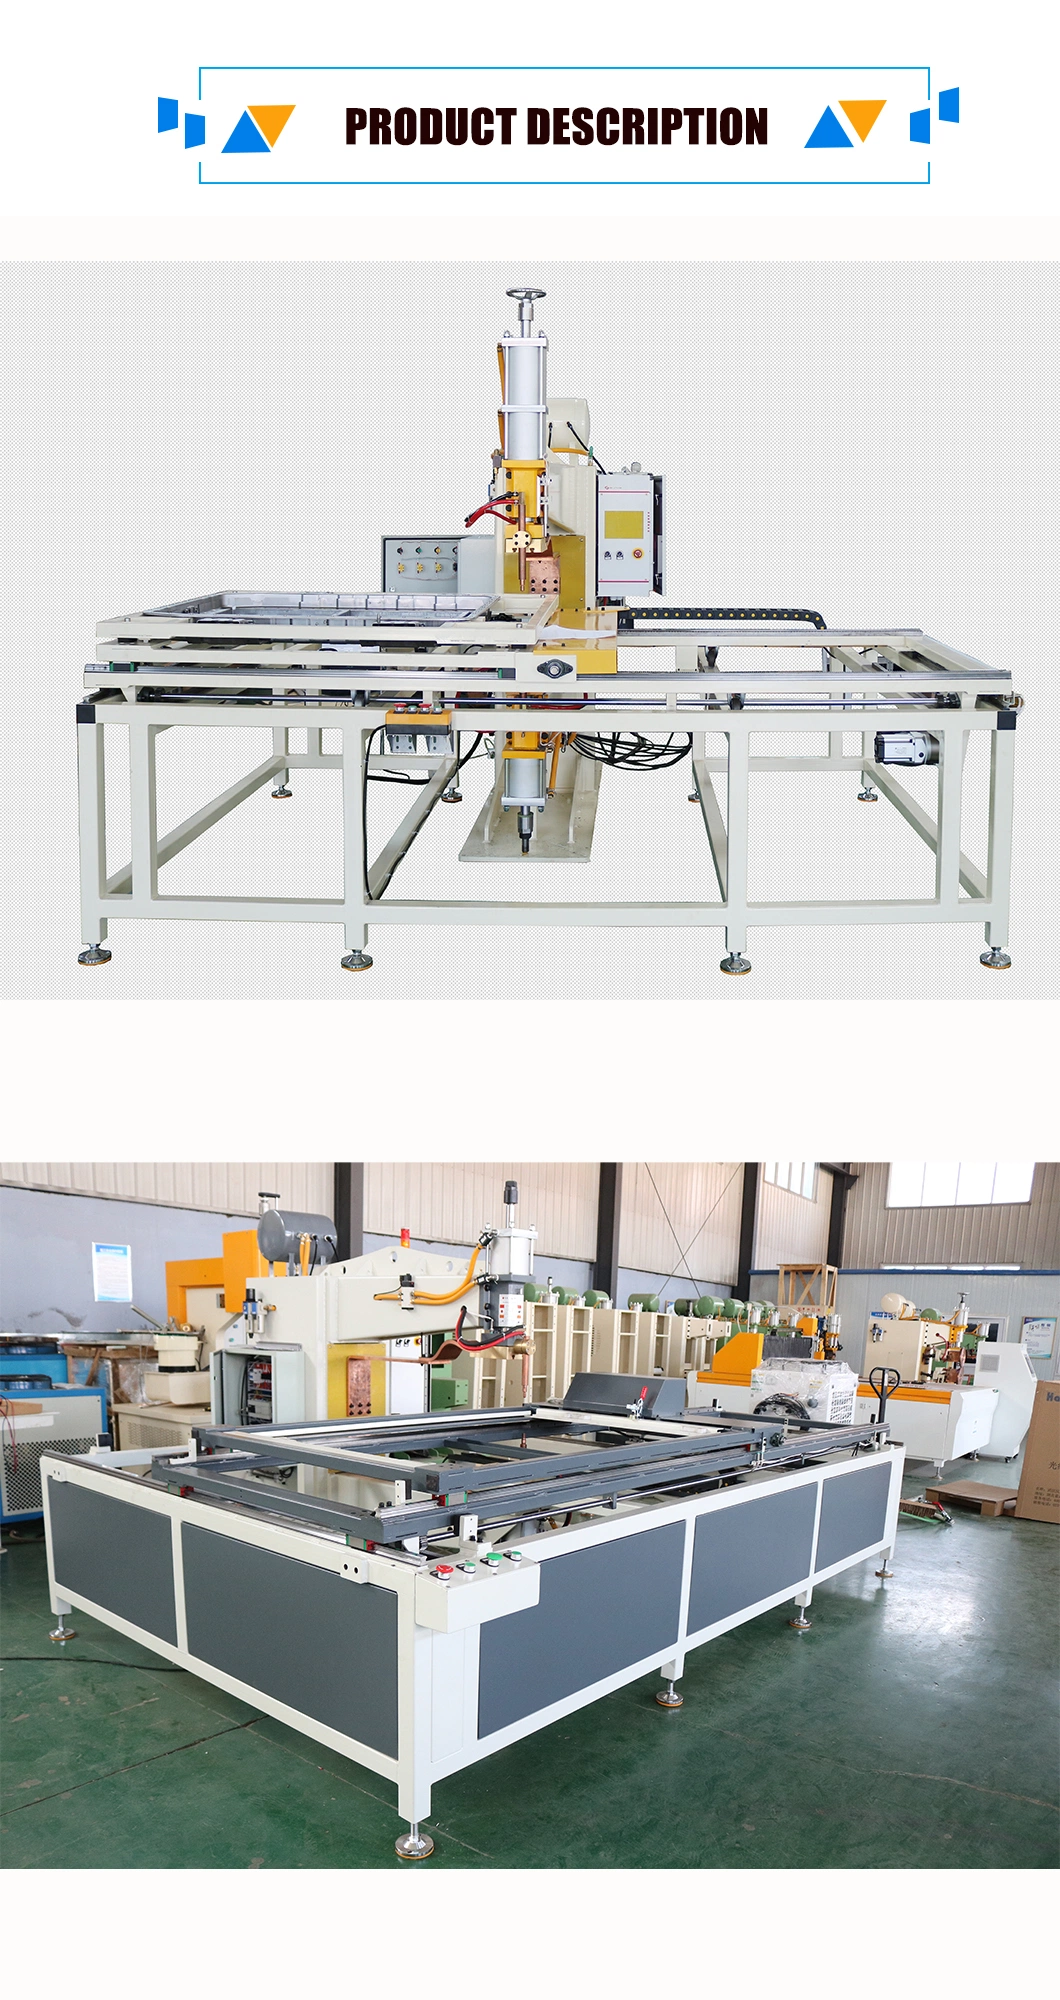 The Non-Standard Customized X Y Axis Spot Welding Machine